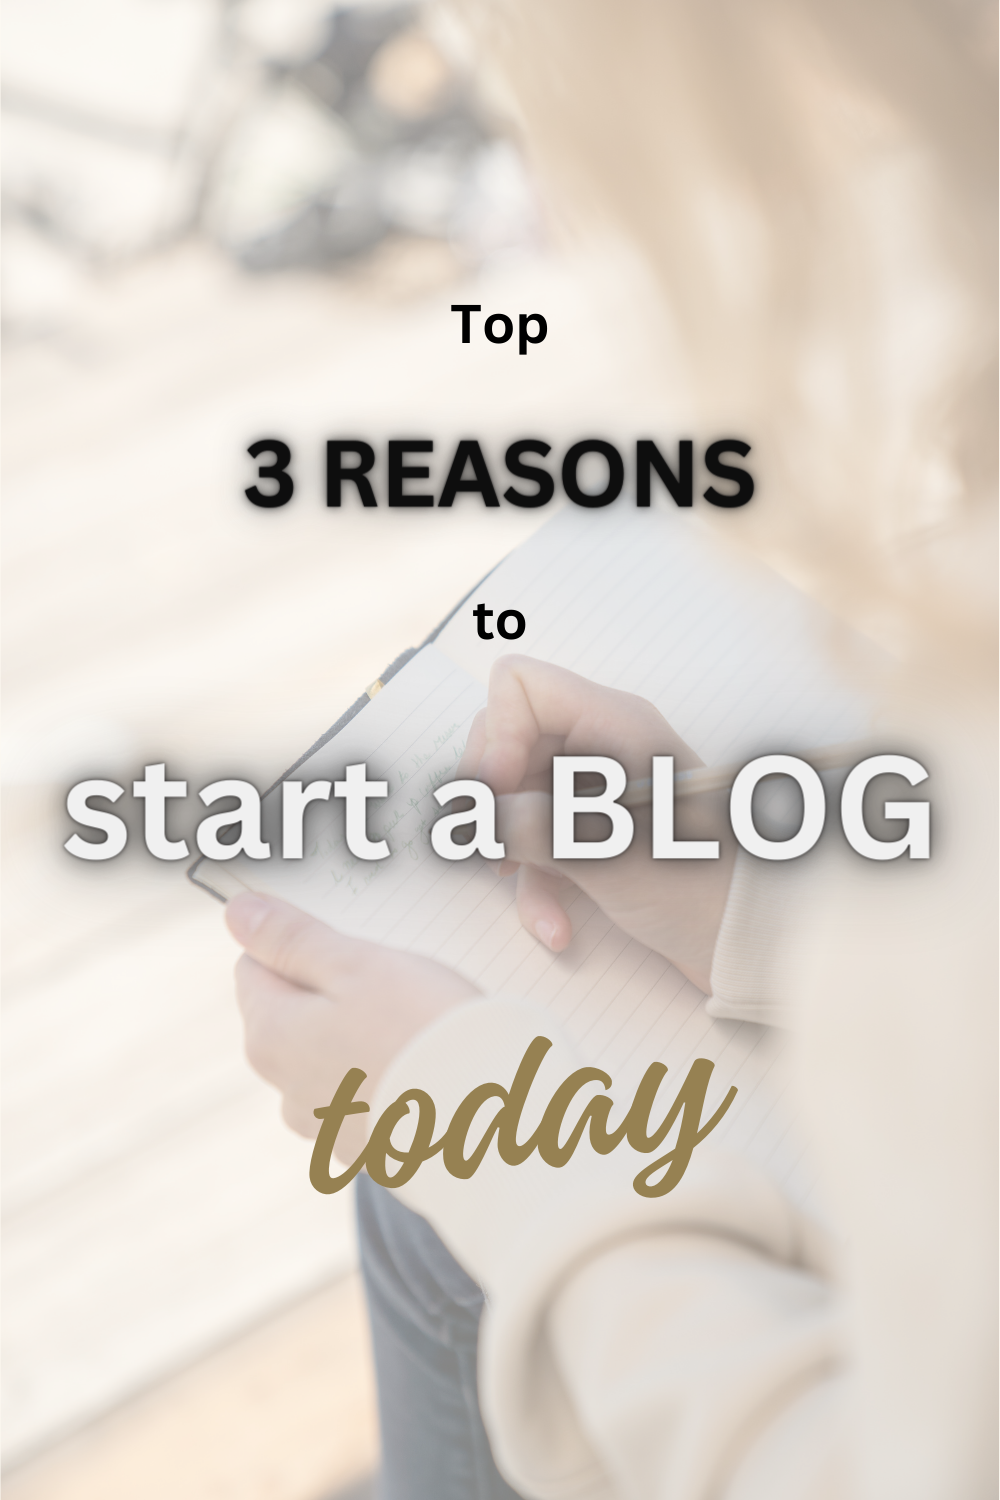 Top 3 Reasons Why You Should Start a Blog